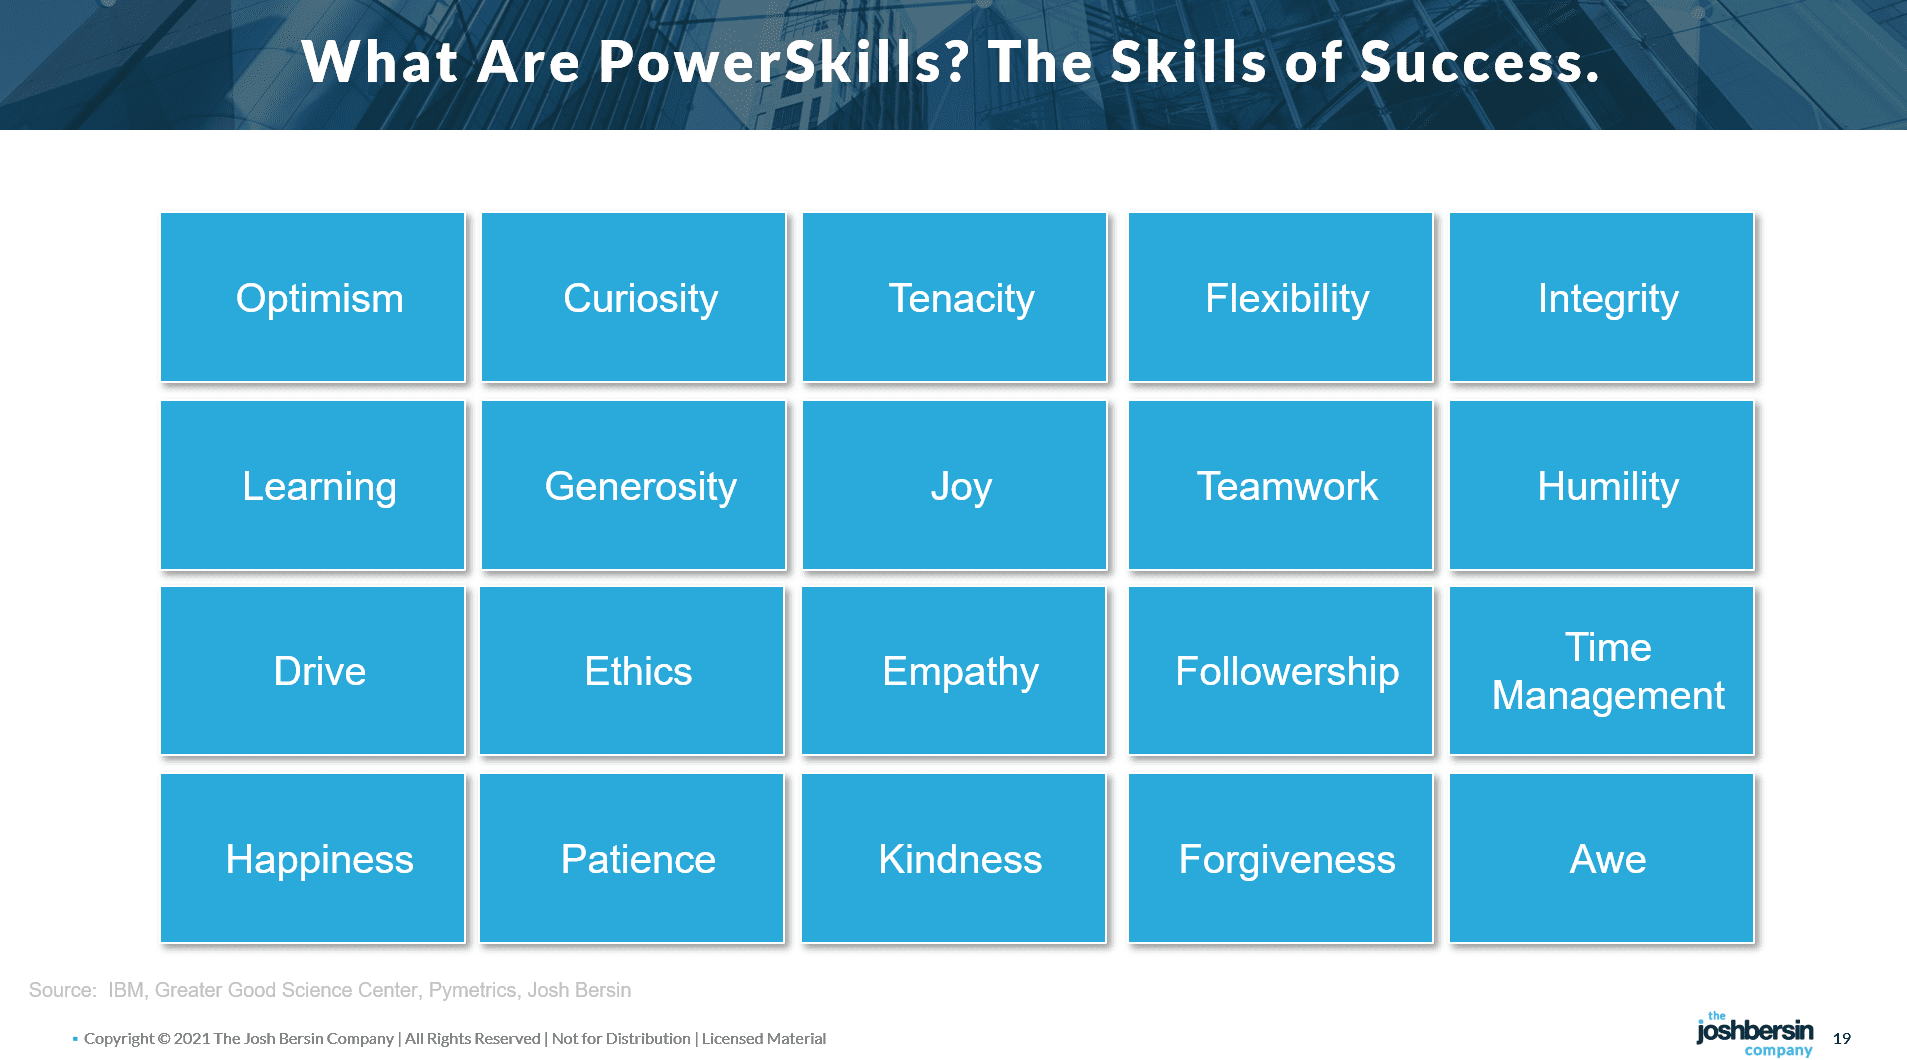 What Are Power Skills